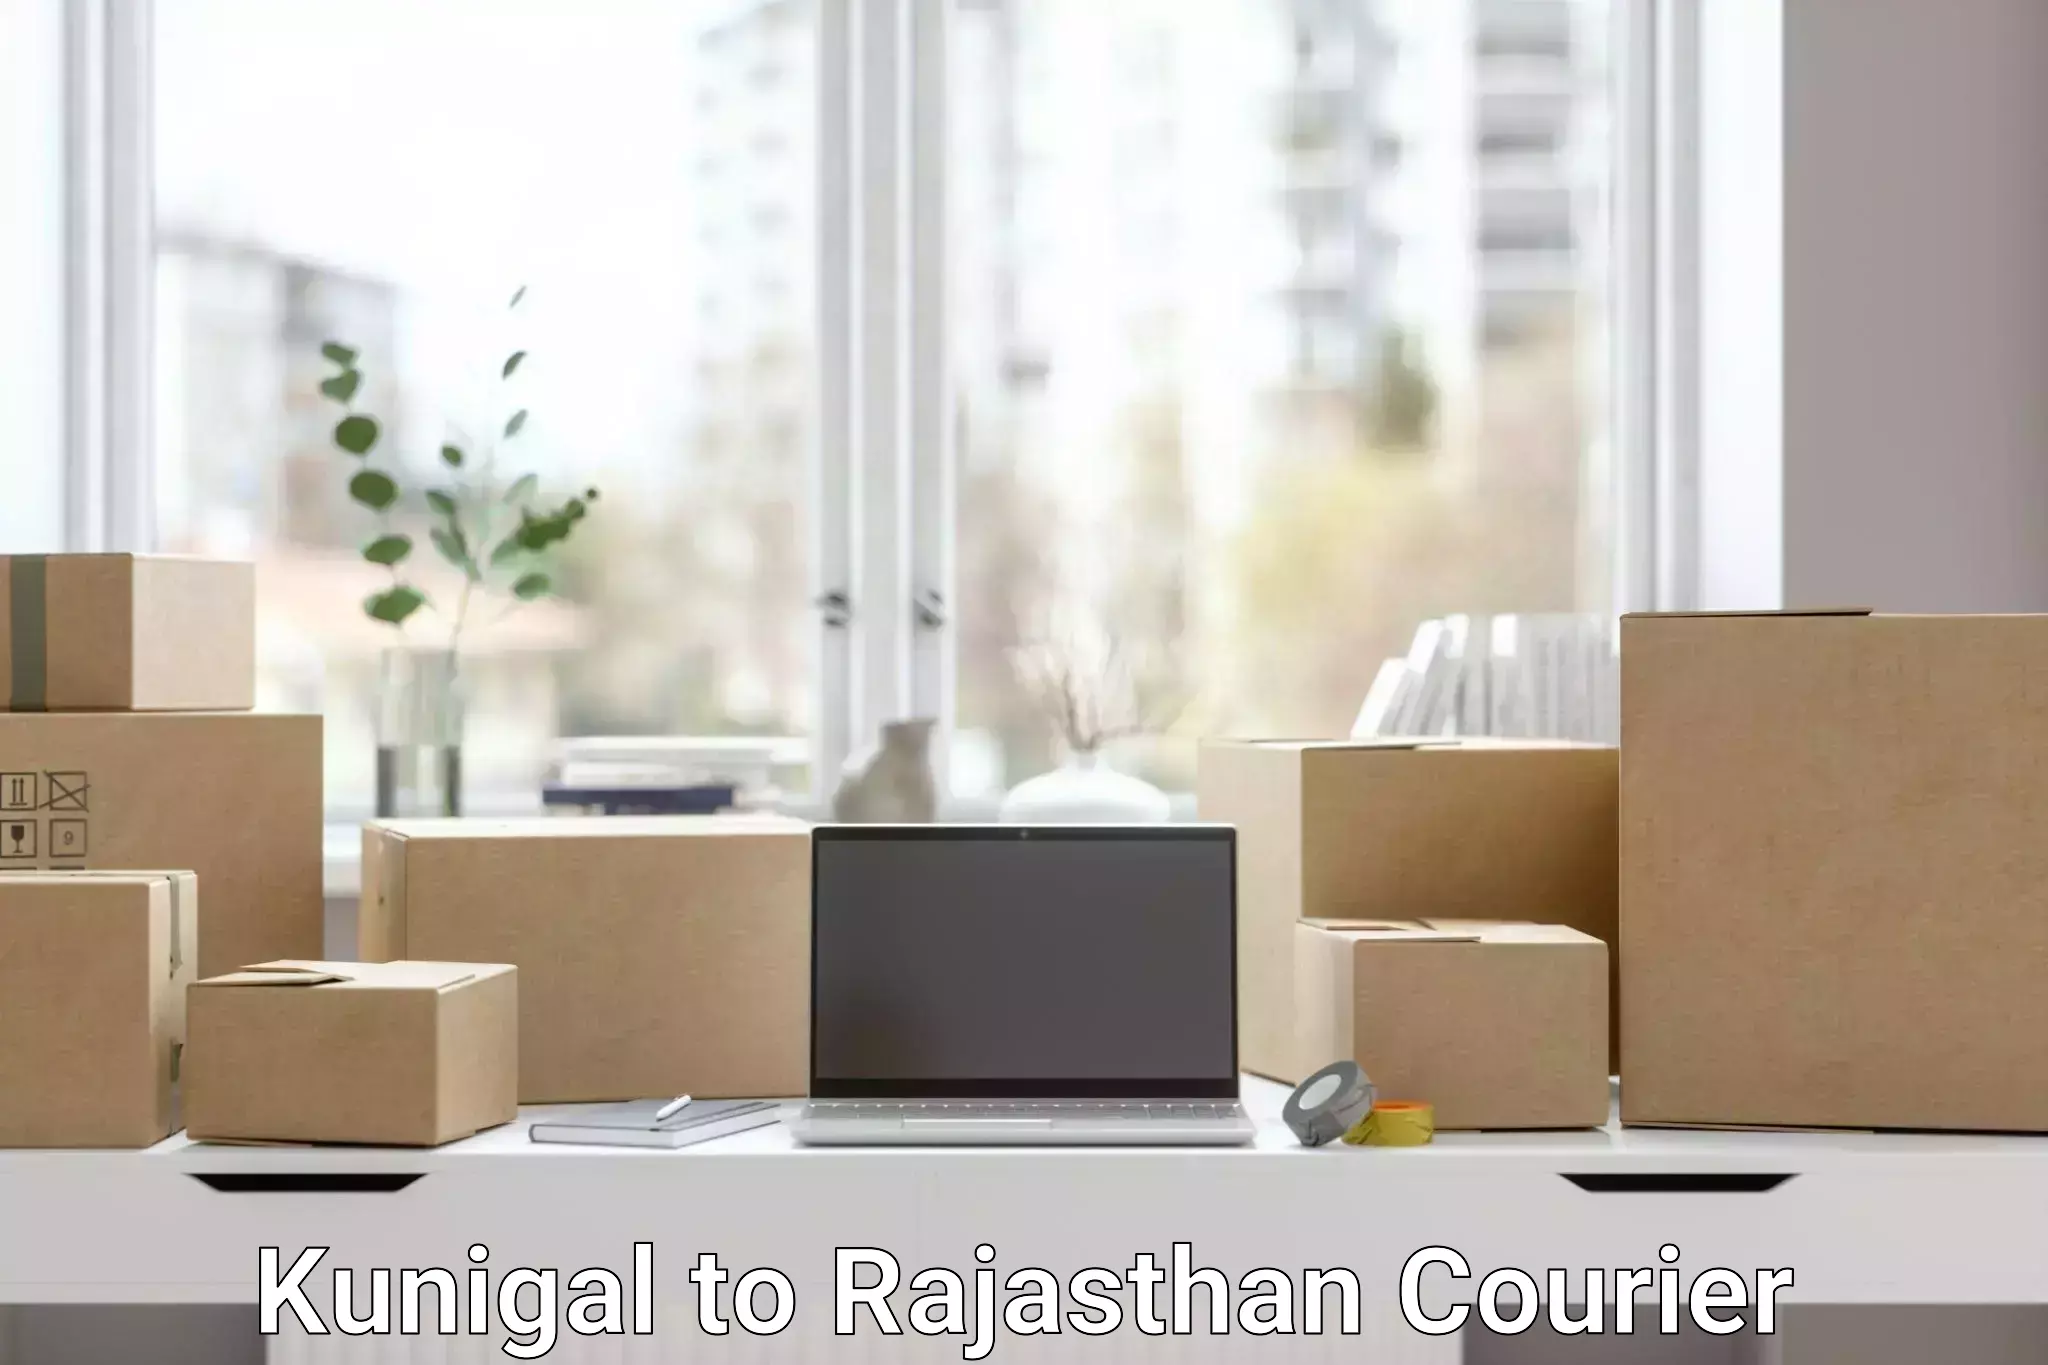 Courier service comparison Kunigal to Rajasthan